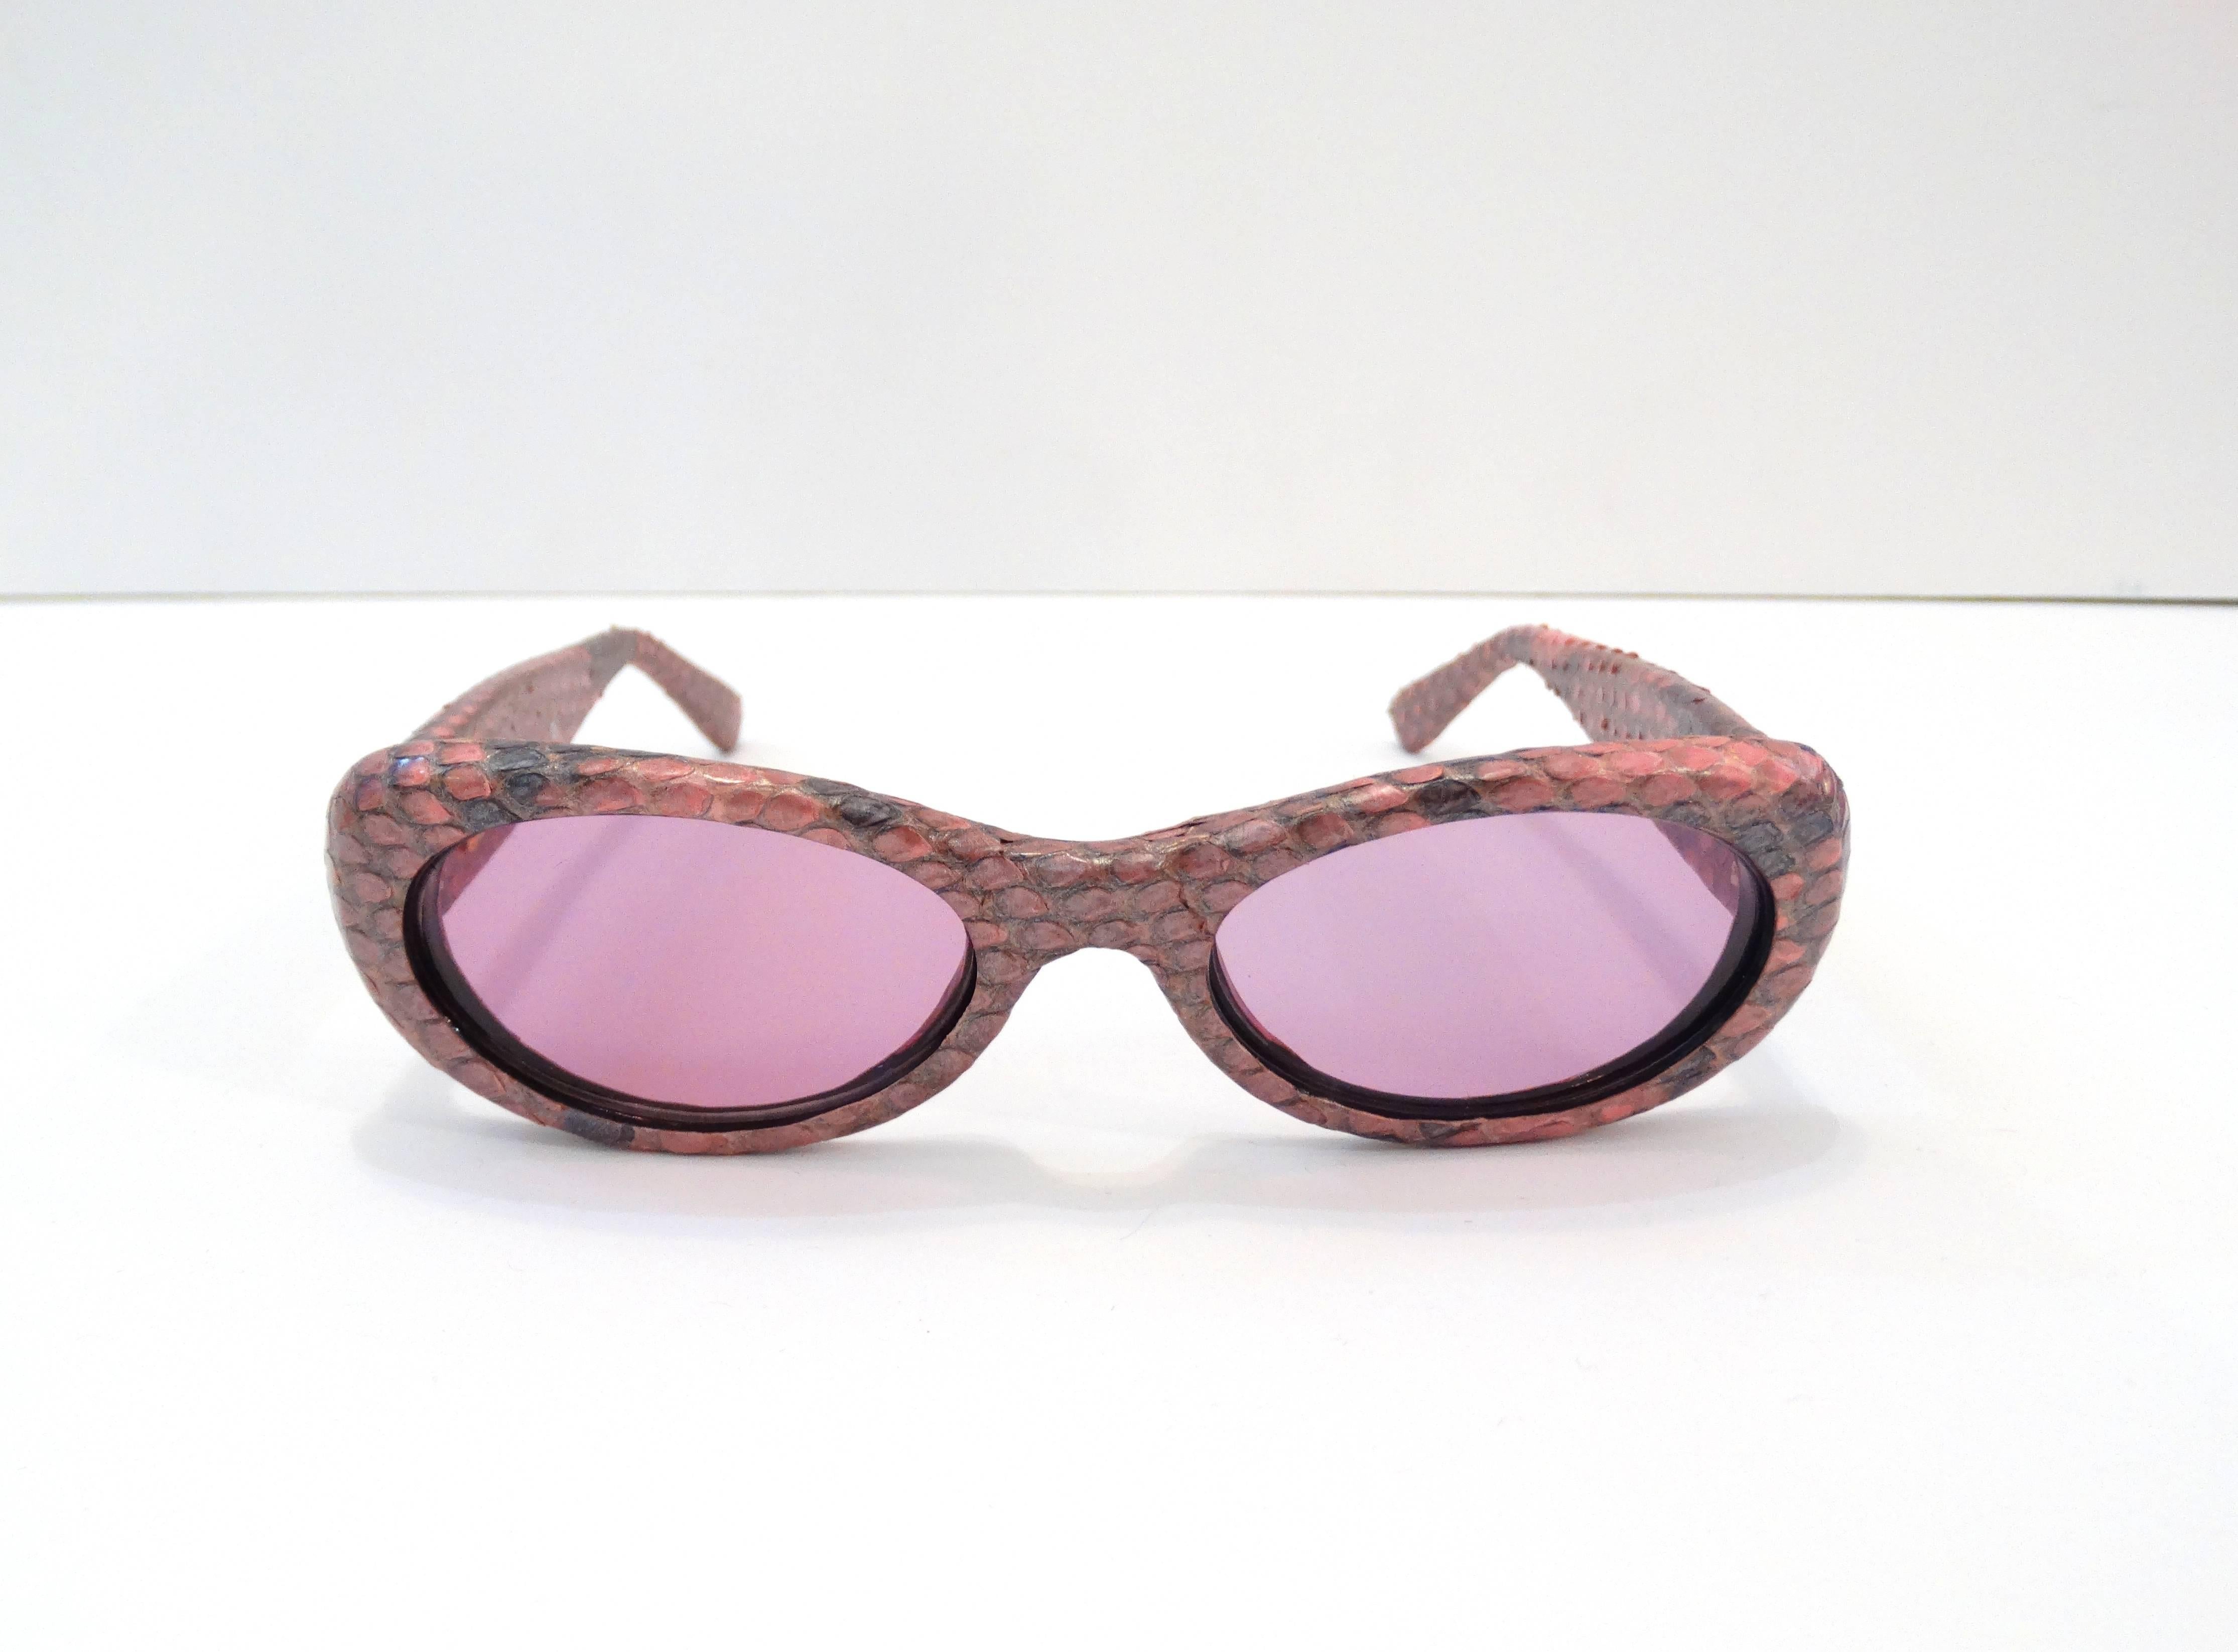 Oh so Chic 1990s snakeskin glasses from Gianni Versace! Pink and lilac faux snakeskin accented with gold stud Versace signature Greek pattern on the sides. Light pink tinted oval lenses. Gianni Versace signature on the inside of right arm with small